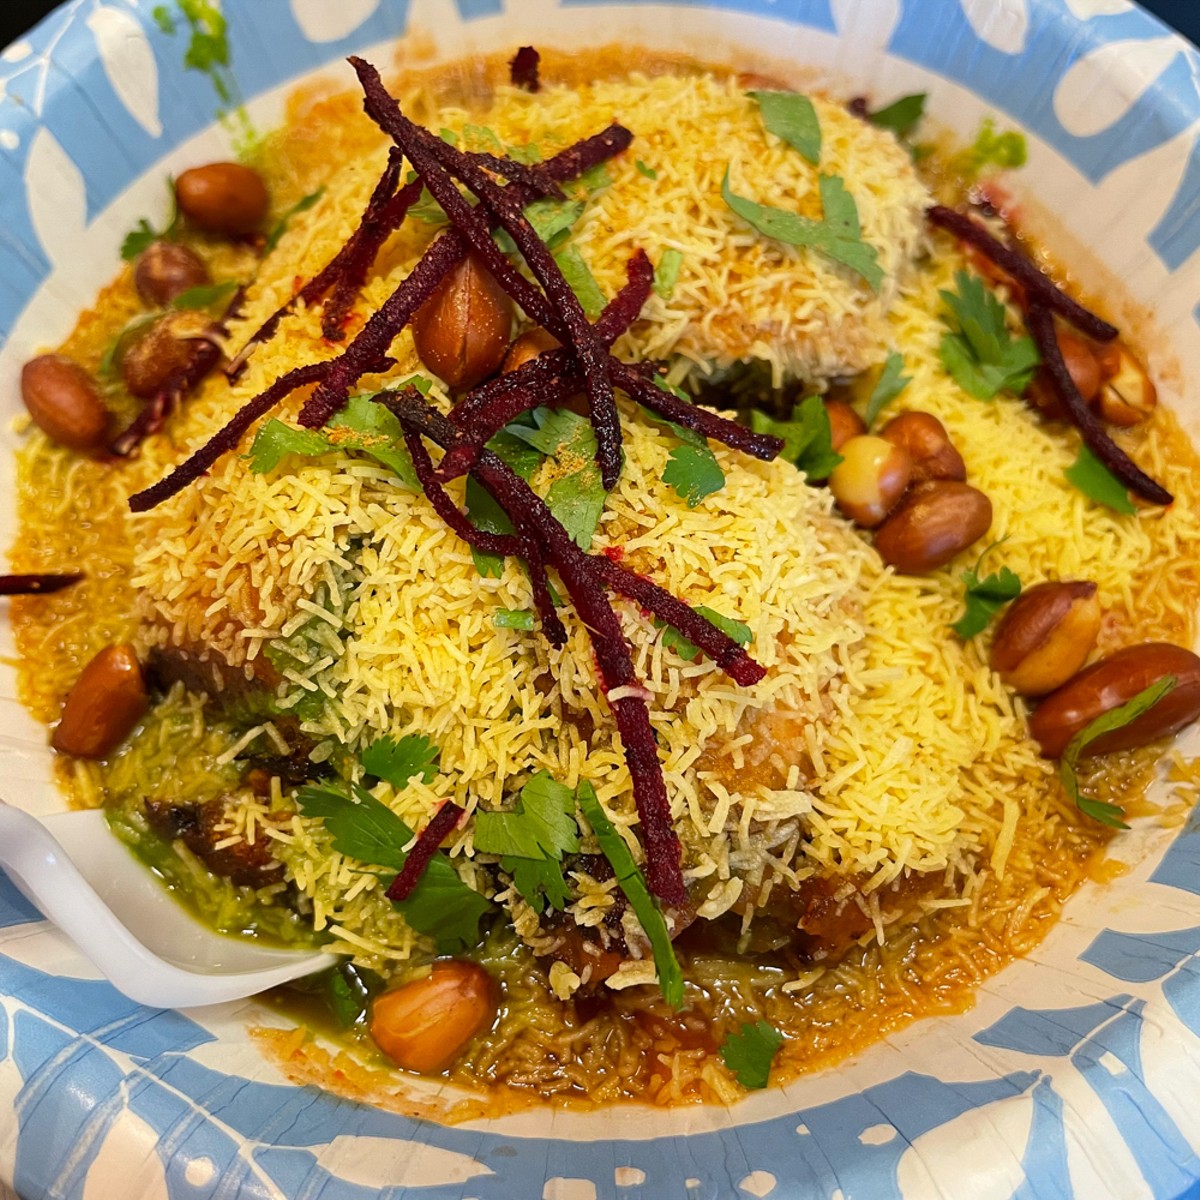 Chaat, the quintessential Indian street food, comes in a variety of tantalizing flavors and textures. Dabeli chaat was a spicy, fruity, and filling potato snack topped with peanuts and crunchy sev noodles.